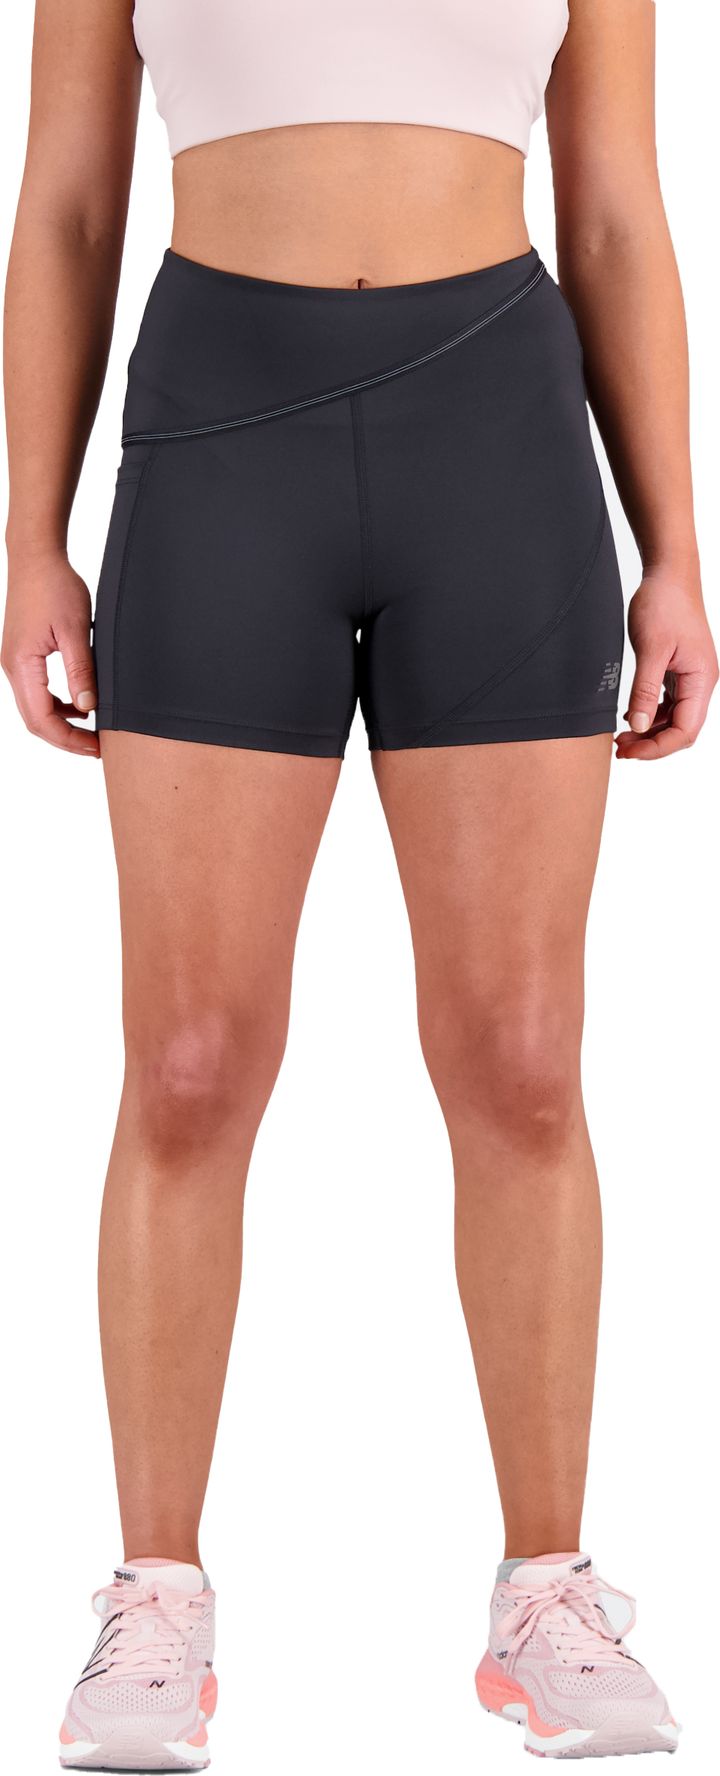 Women's Q Speed Shape Shield 4 Inch Fitted Short Black New Balance